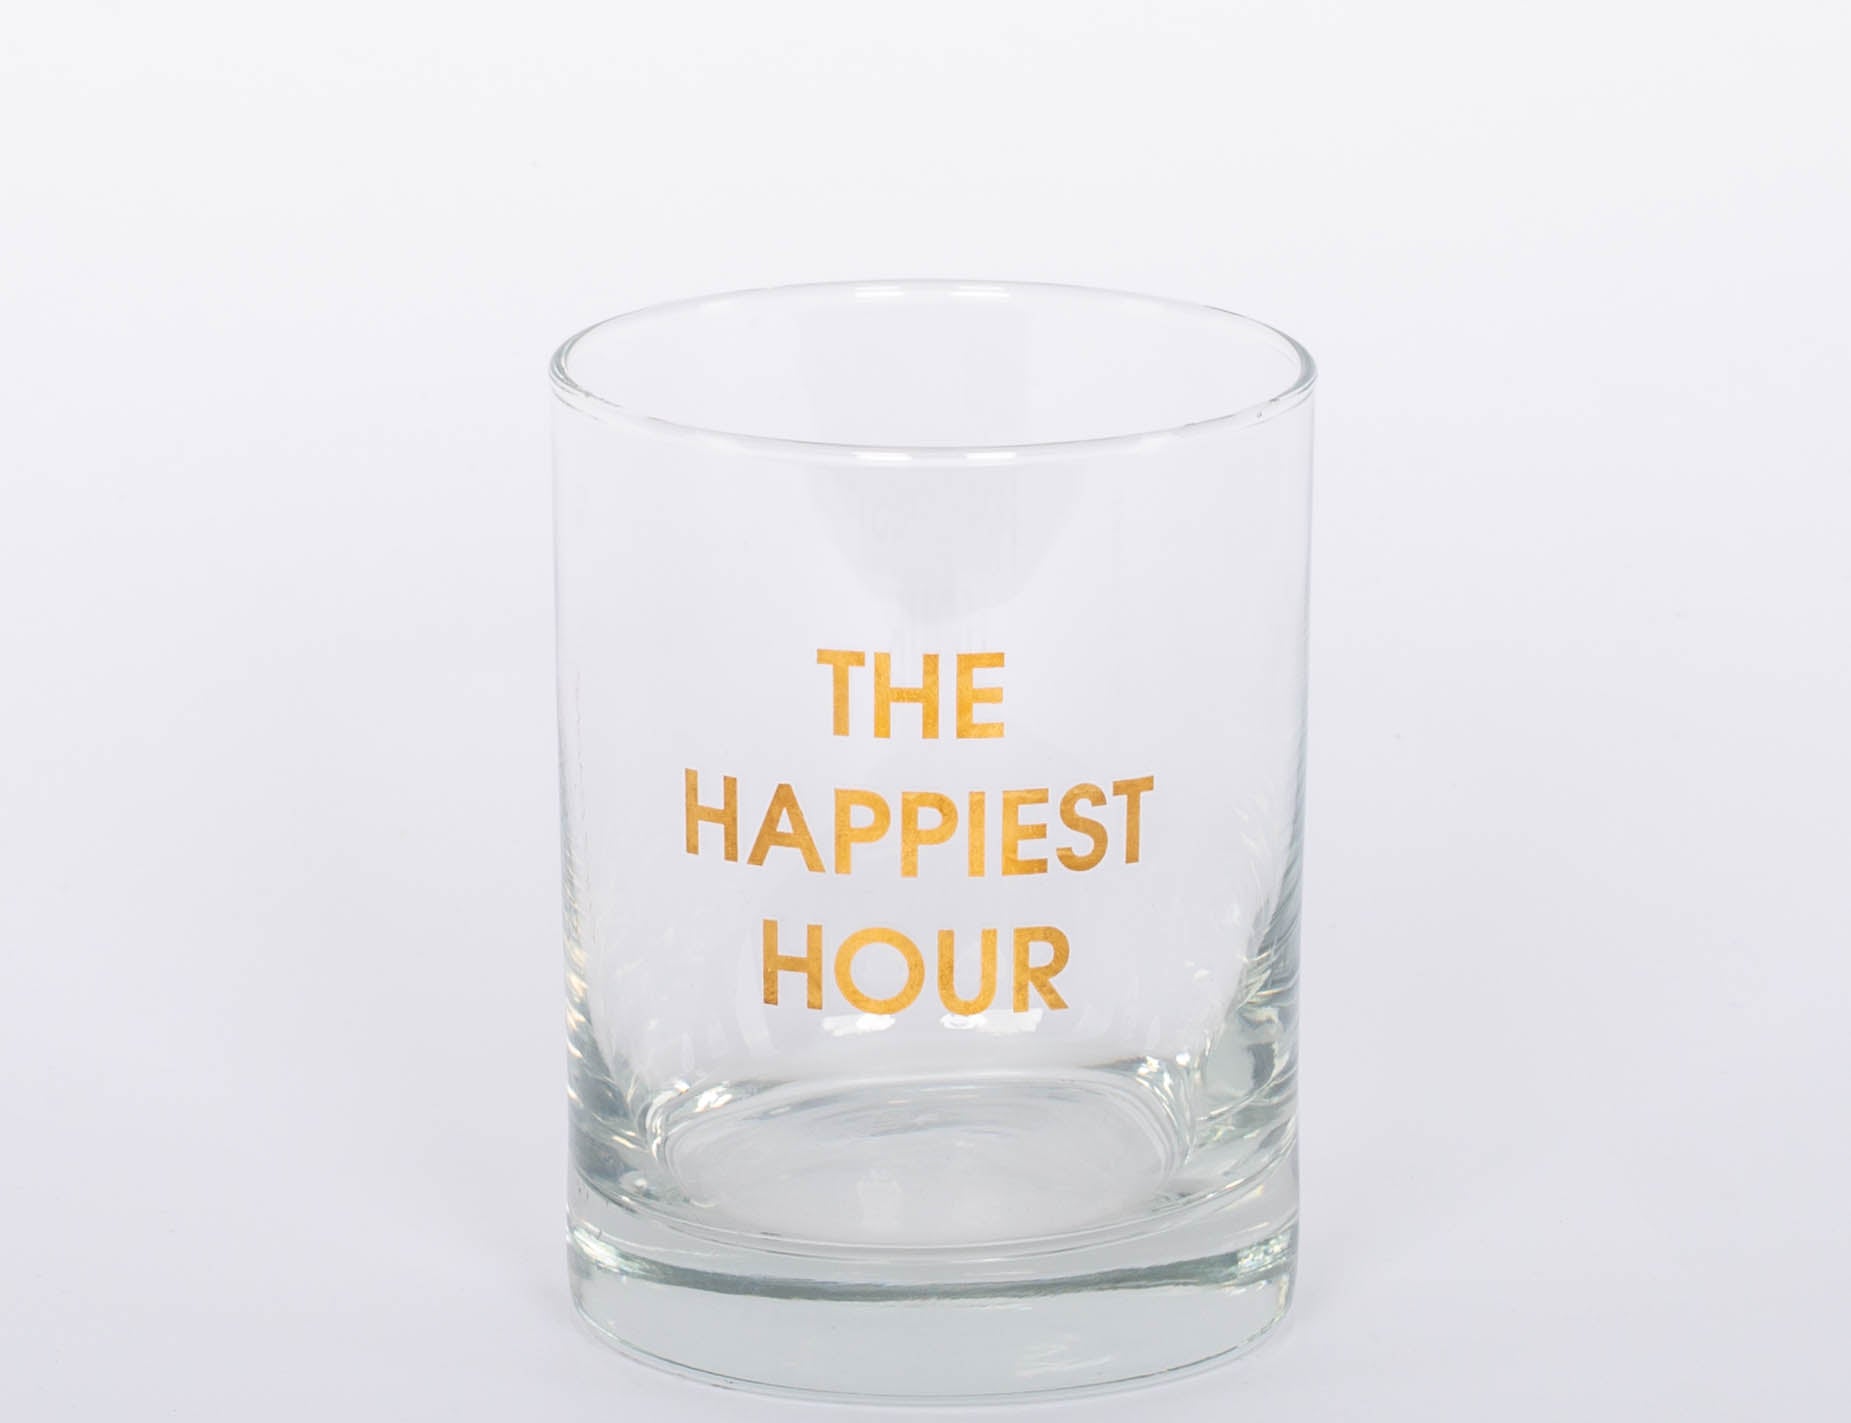 "The Happiest Hour" gold foil rocks glass.   13.25 oz. Rocks Glass, Gold Foil Printed 